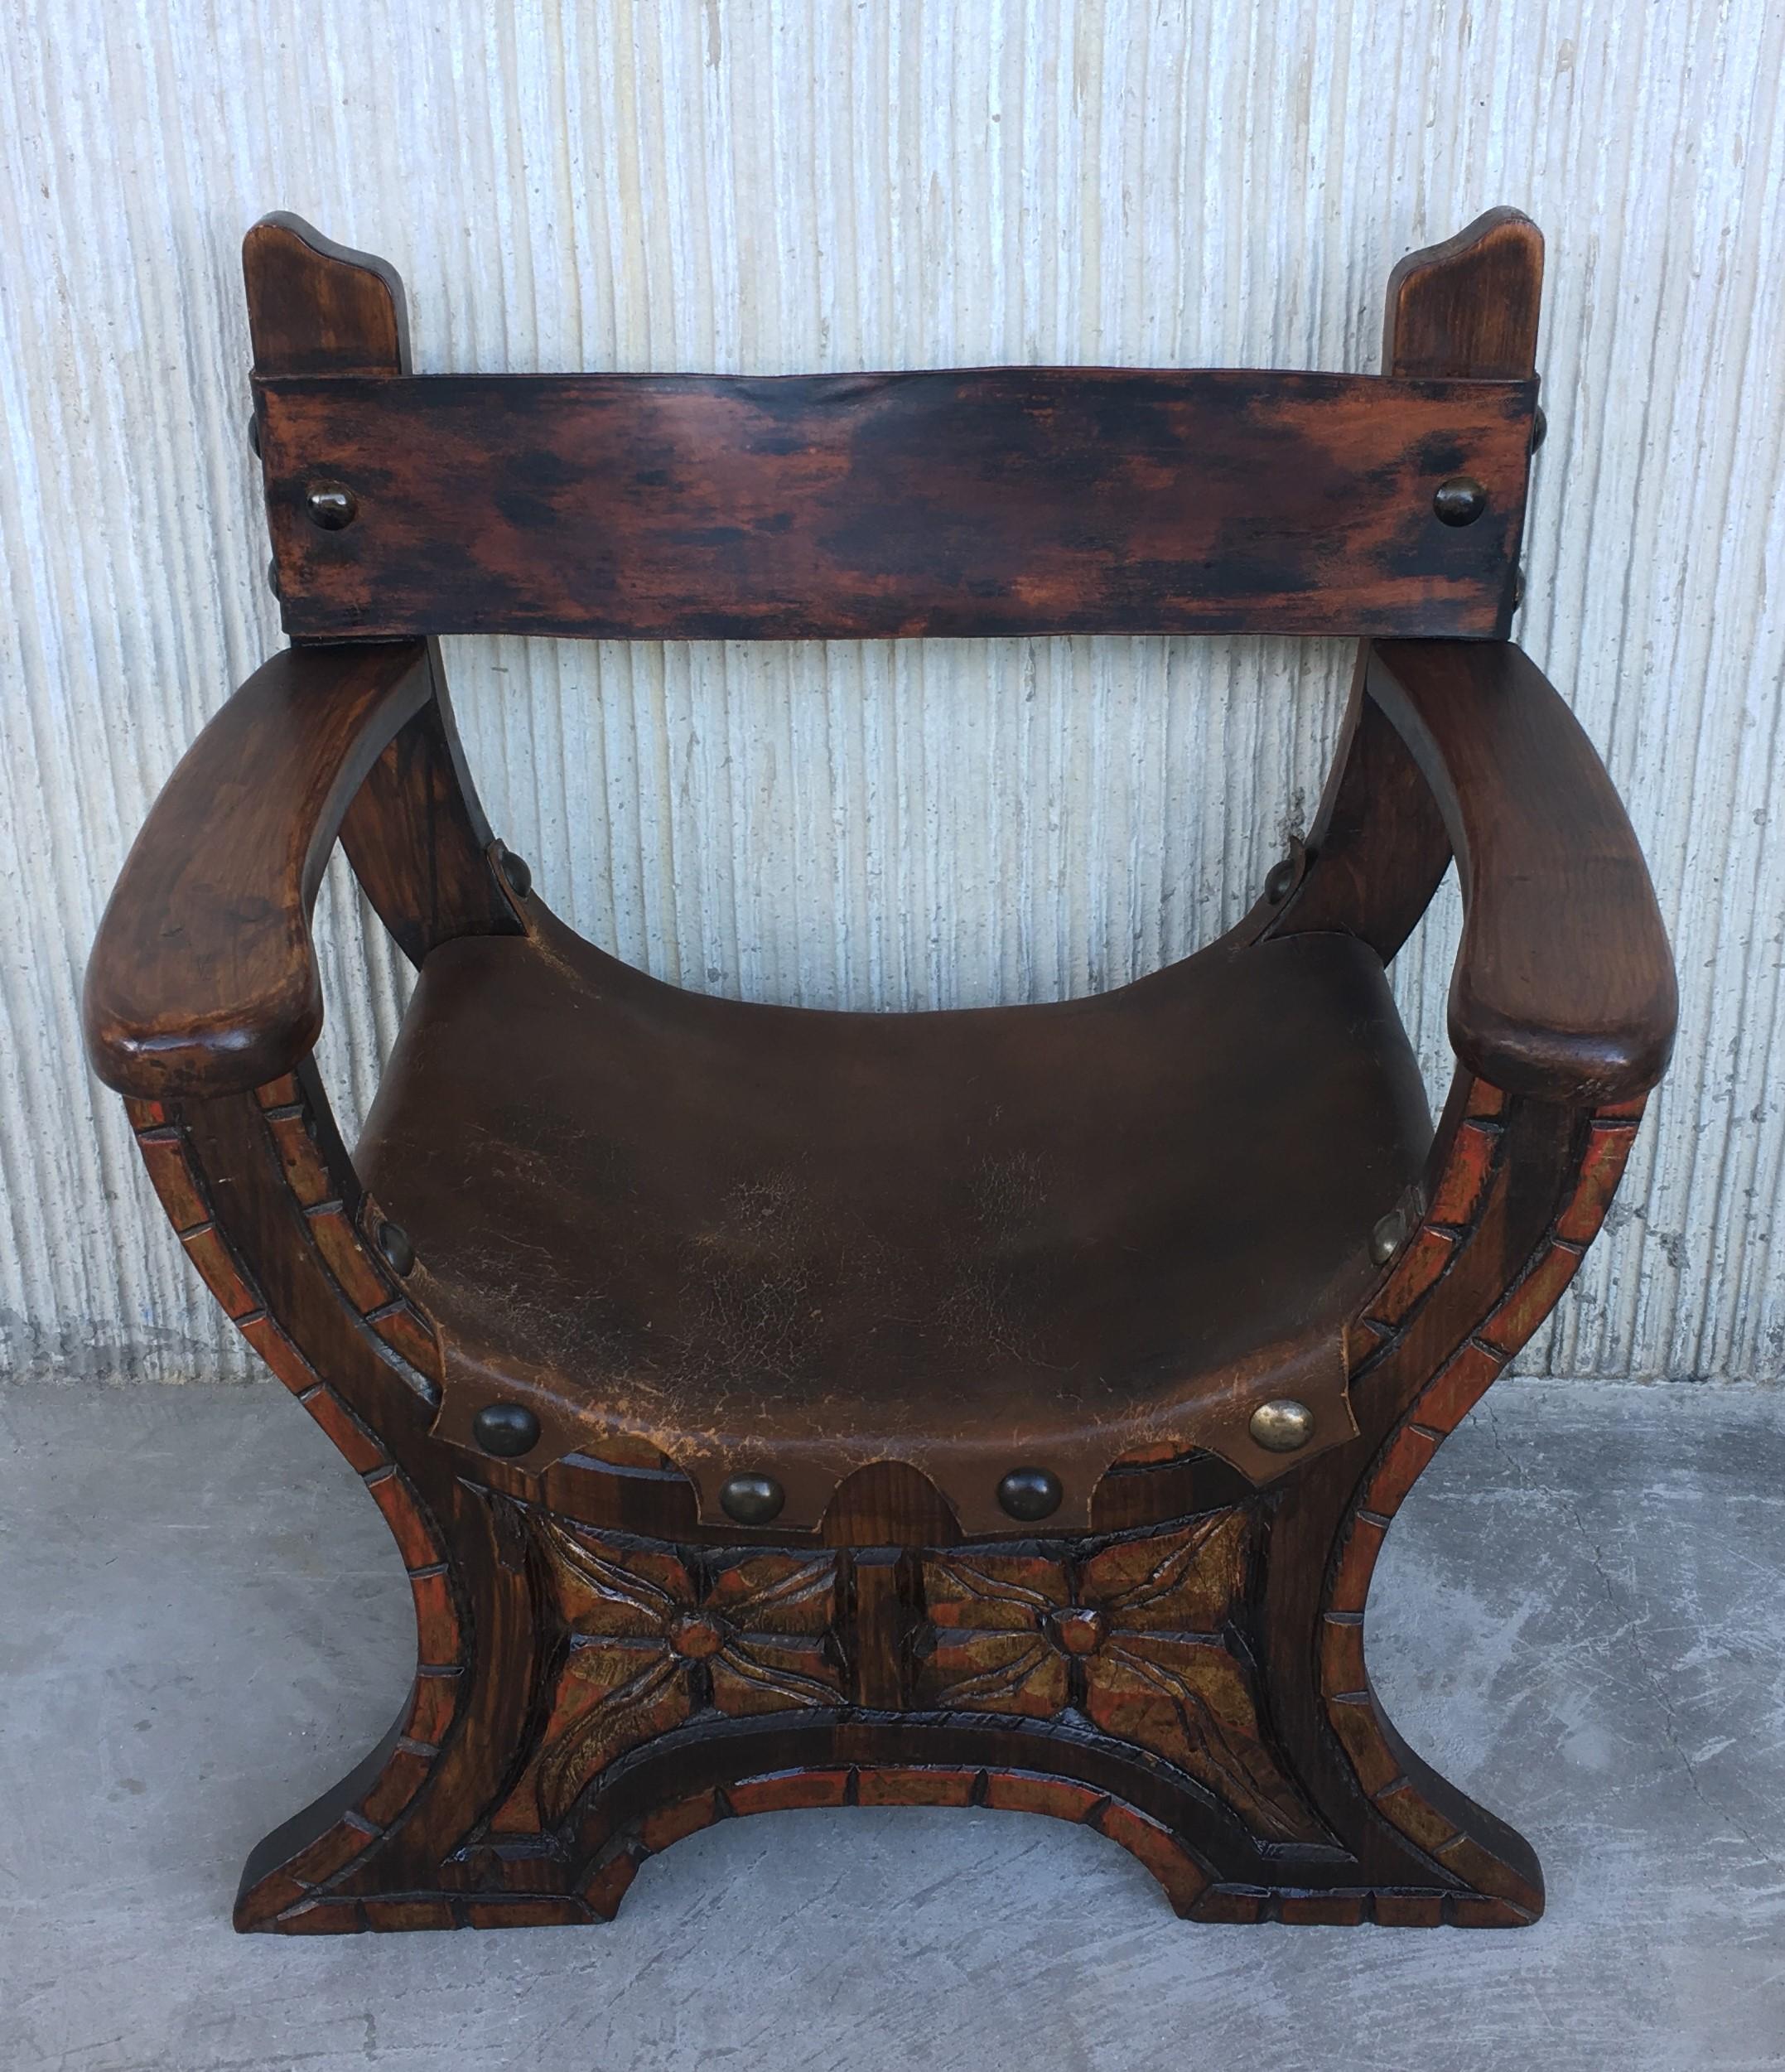 20th century Spanish carved savonarola wooden armchairs leather seat
Beautiful savonarola country armchair
It come of the Monte Picayo Casino, in Valencia,Spain.